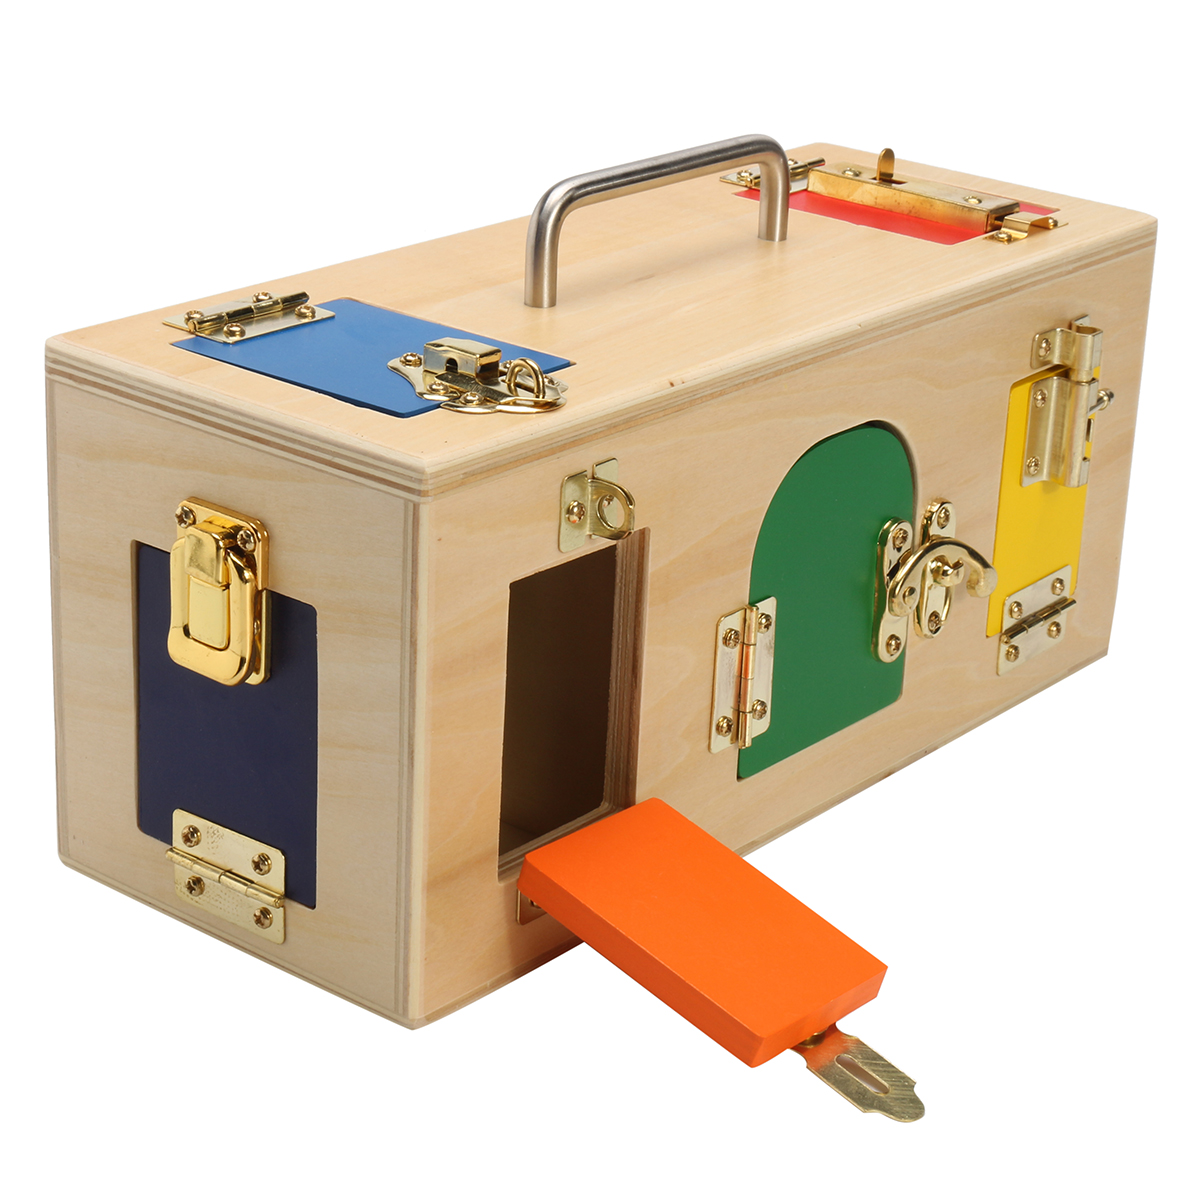 Kids-Life-Skill-Learning-Wooden-Montessori-Practical-Wood-Lock-Box-Educational-Science-Toys-1392942-4